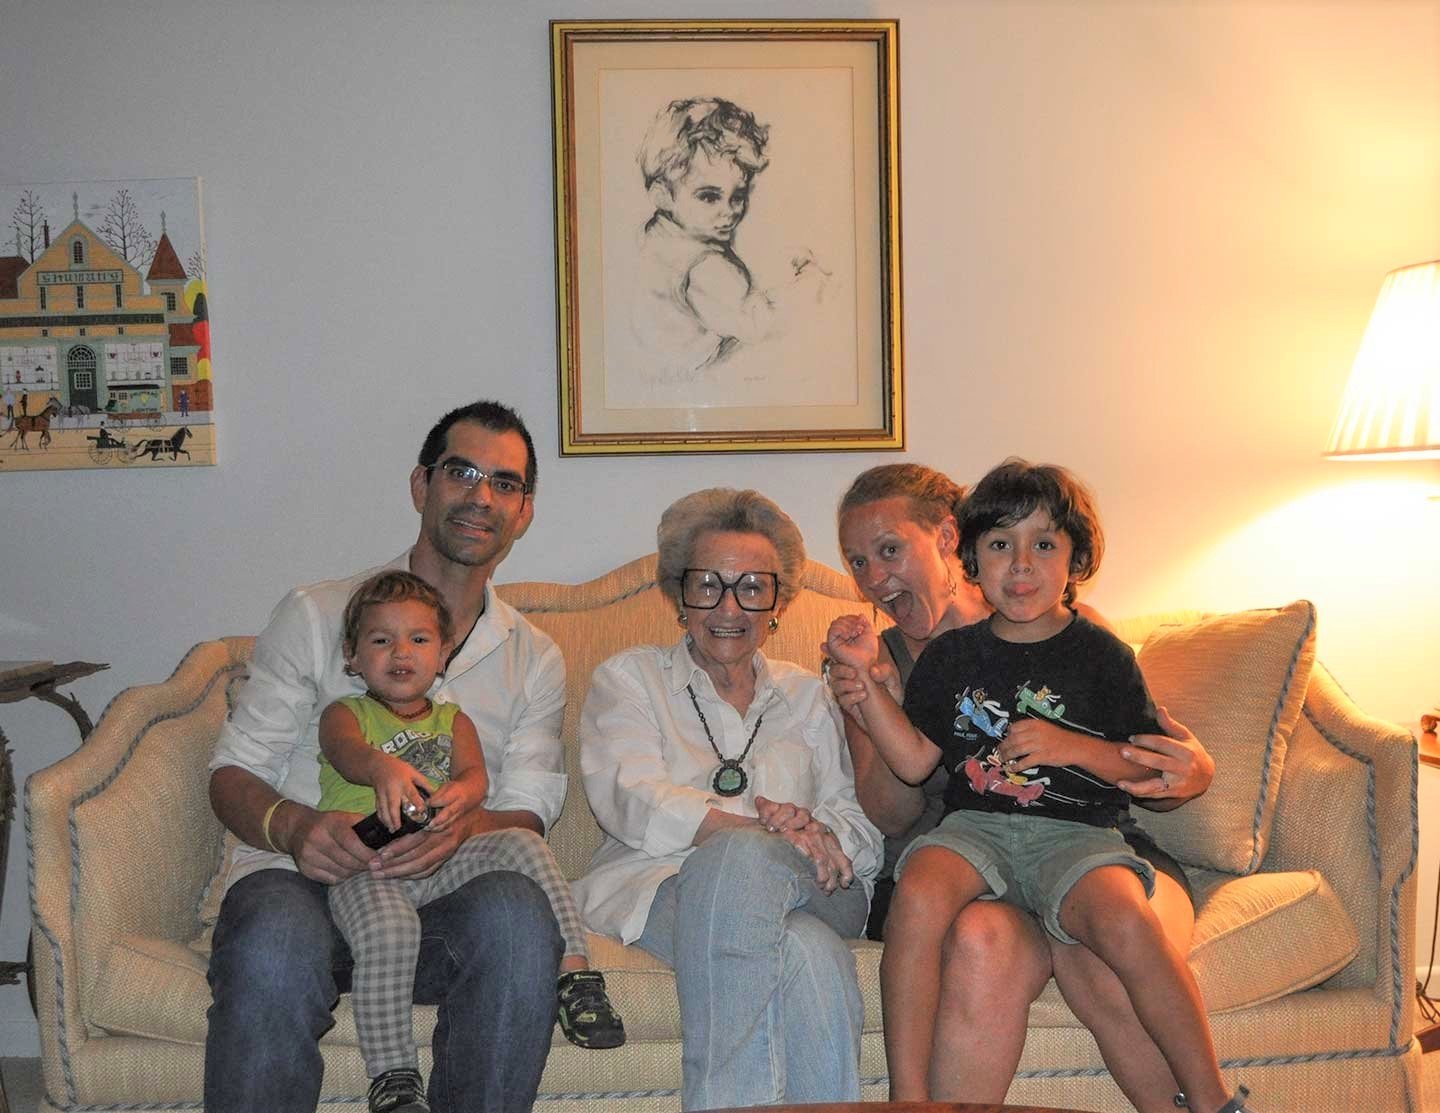 This photo was taken by Aunt Marcia Shuman. Her granddaughter (my cousin Andrea, pictured here with partner Warren, Marcia  and the great-grandchildren) recently interviewed her grandmother via an online organization called “Archive Storycorps” to get clarity on family relationships and some personal commentary on a long life.